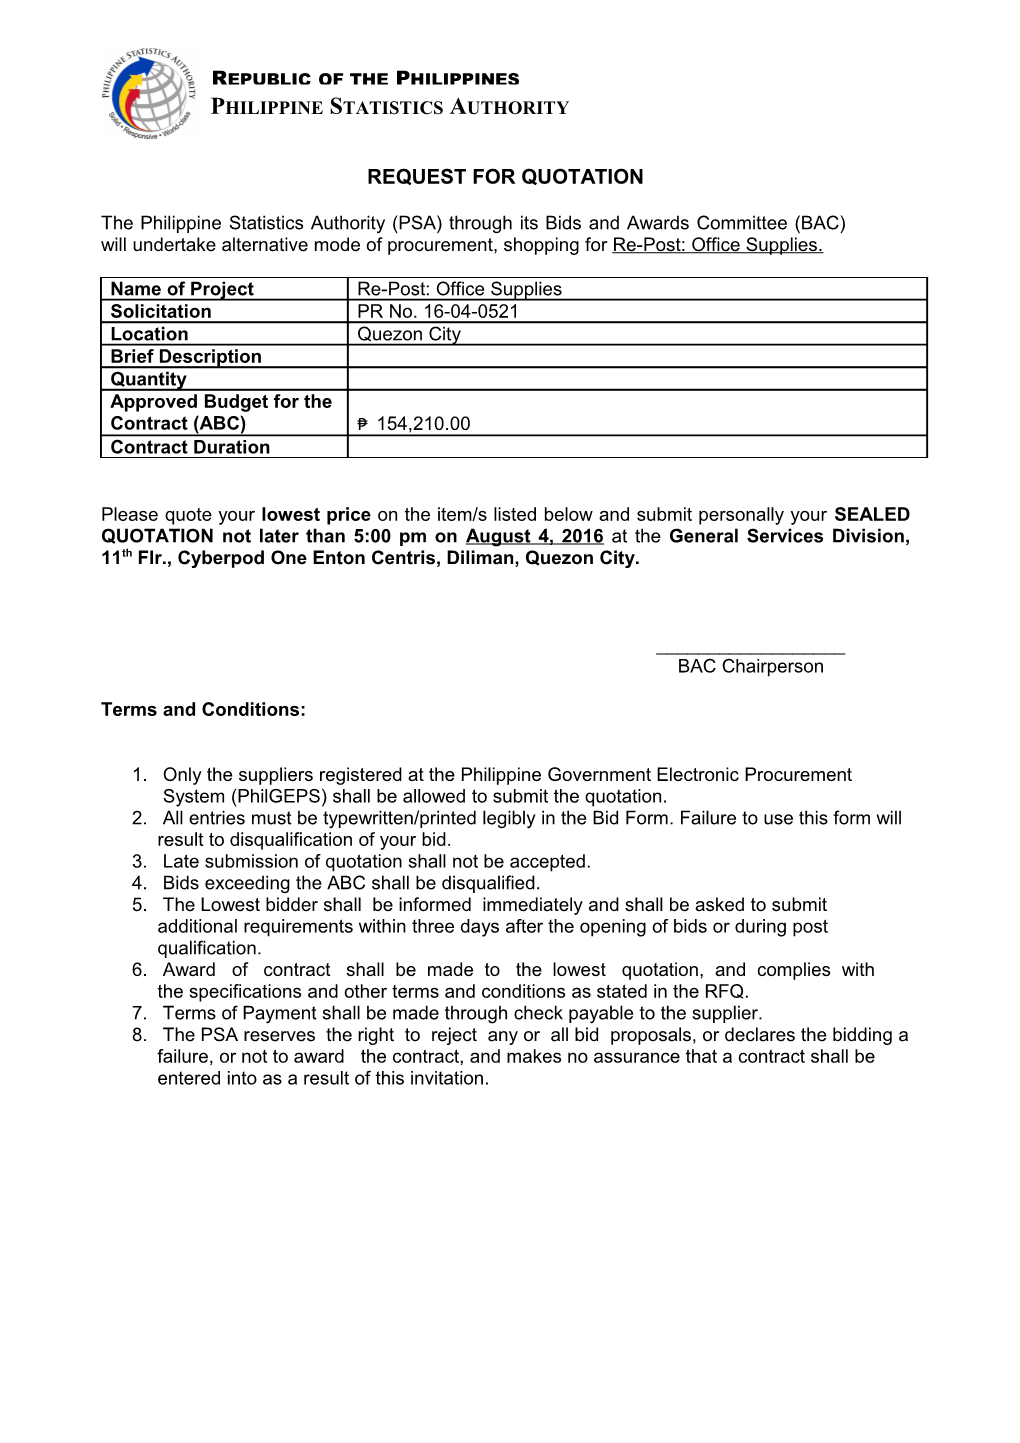 Request for Quotation s37